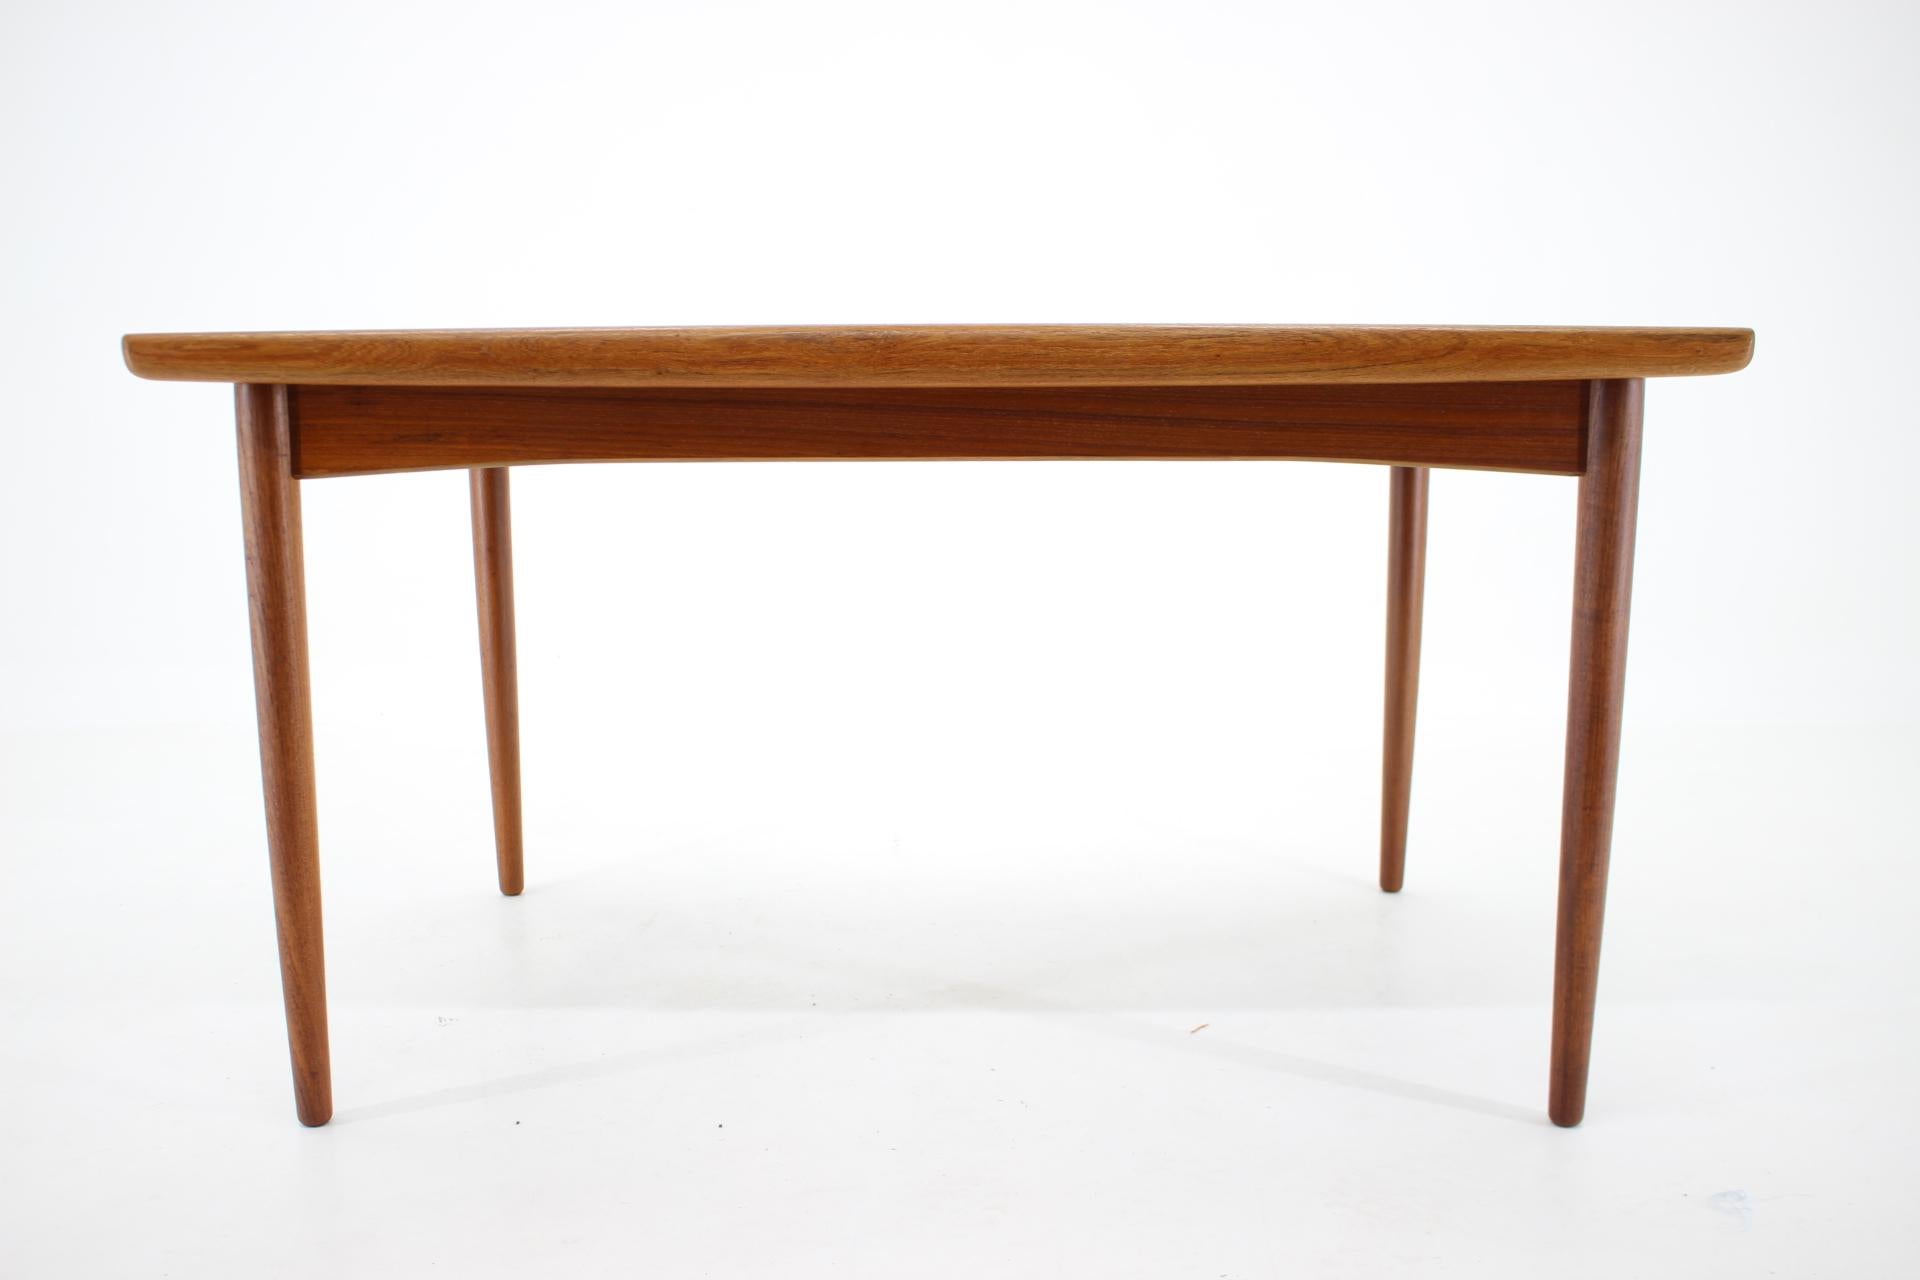 This top of the table is made of teak wood veneer and the central leg from stained beechwood. 
This item was carefully restored.
250 cm when extend.